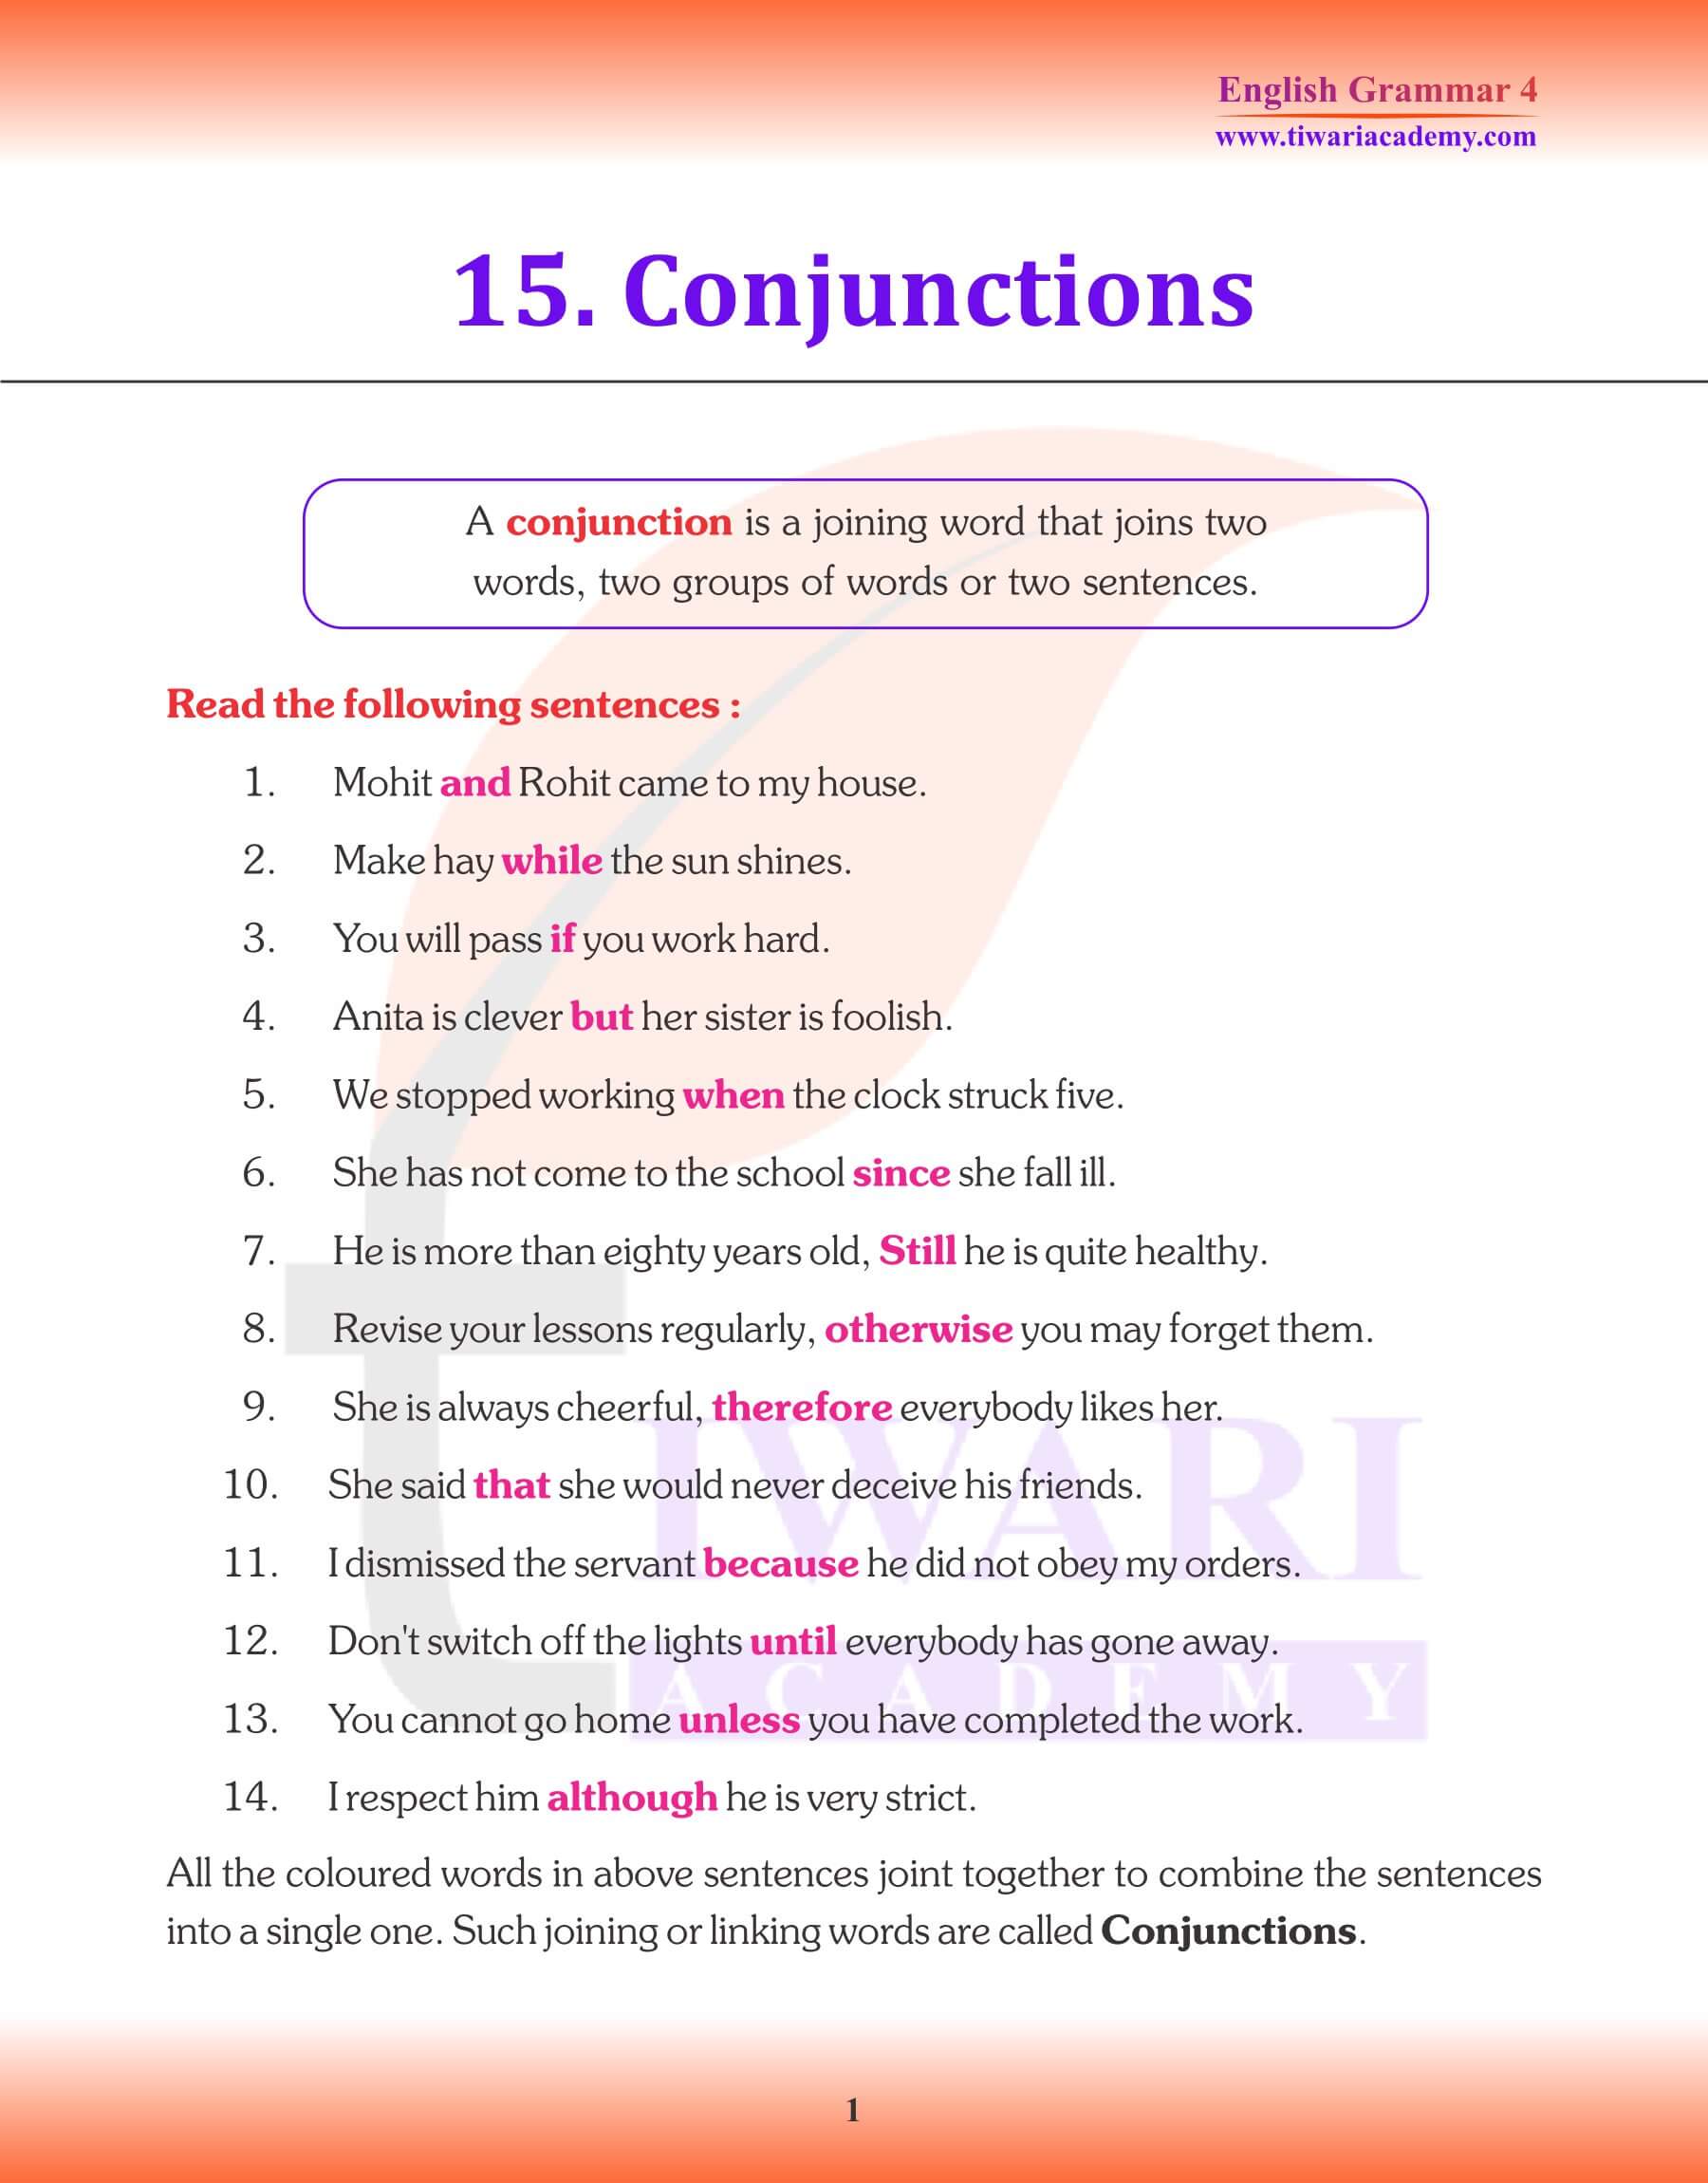 Class 4 English Grammar Conjunctions Revision Book